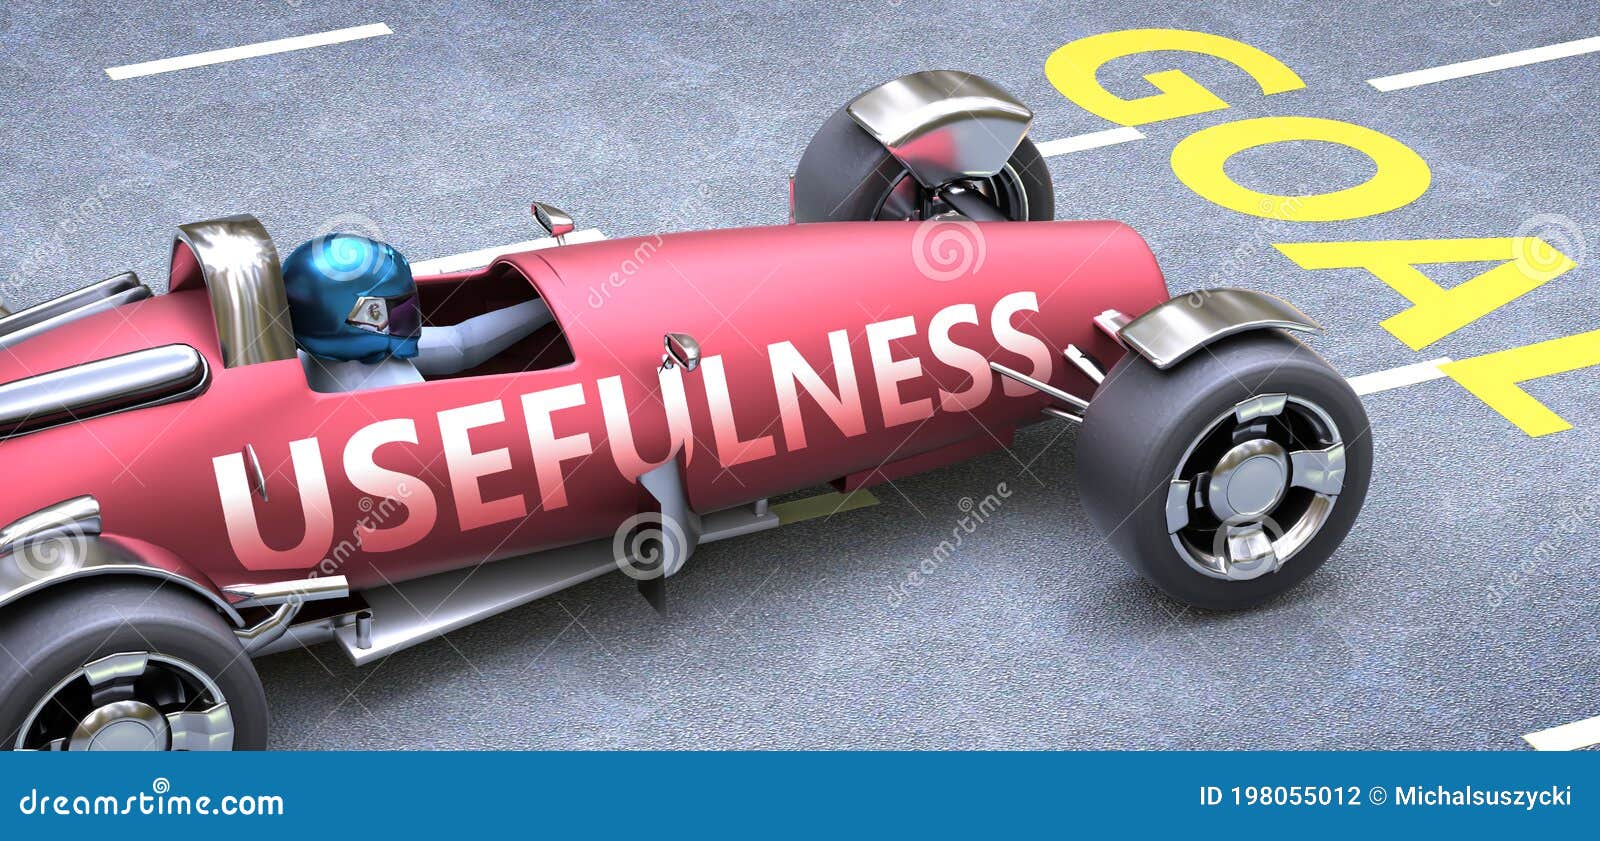 usefulness helps reaching goals, pictured as a race car with a phrase usefulness on a track as a metaphor of usefulness playing